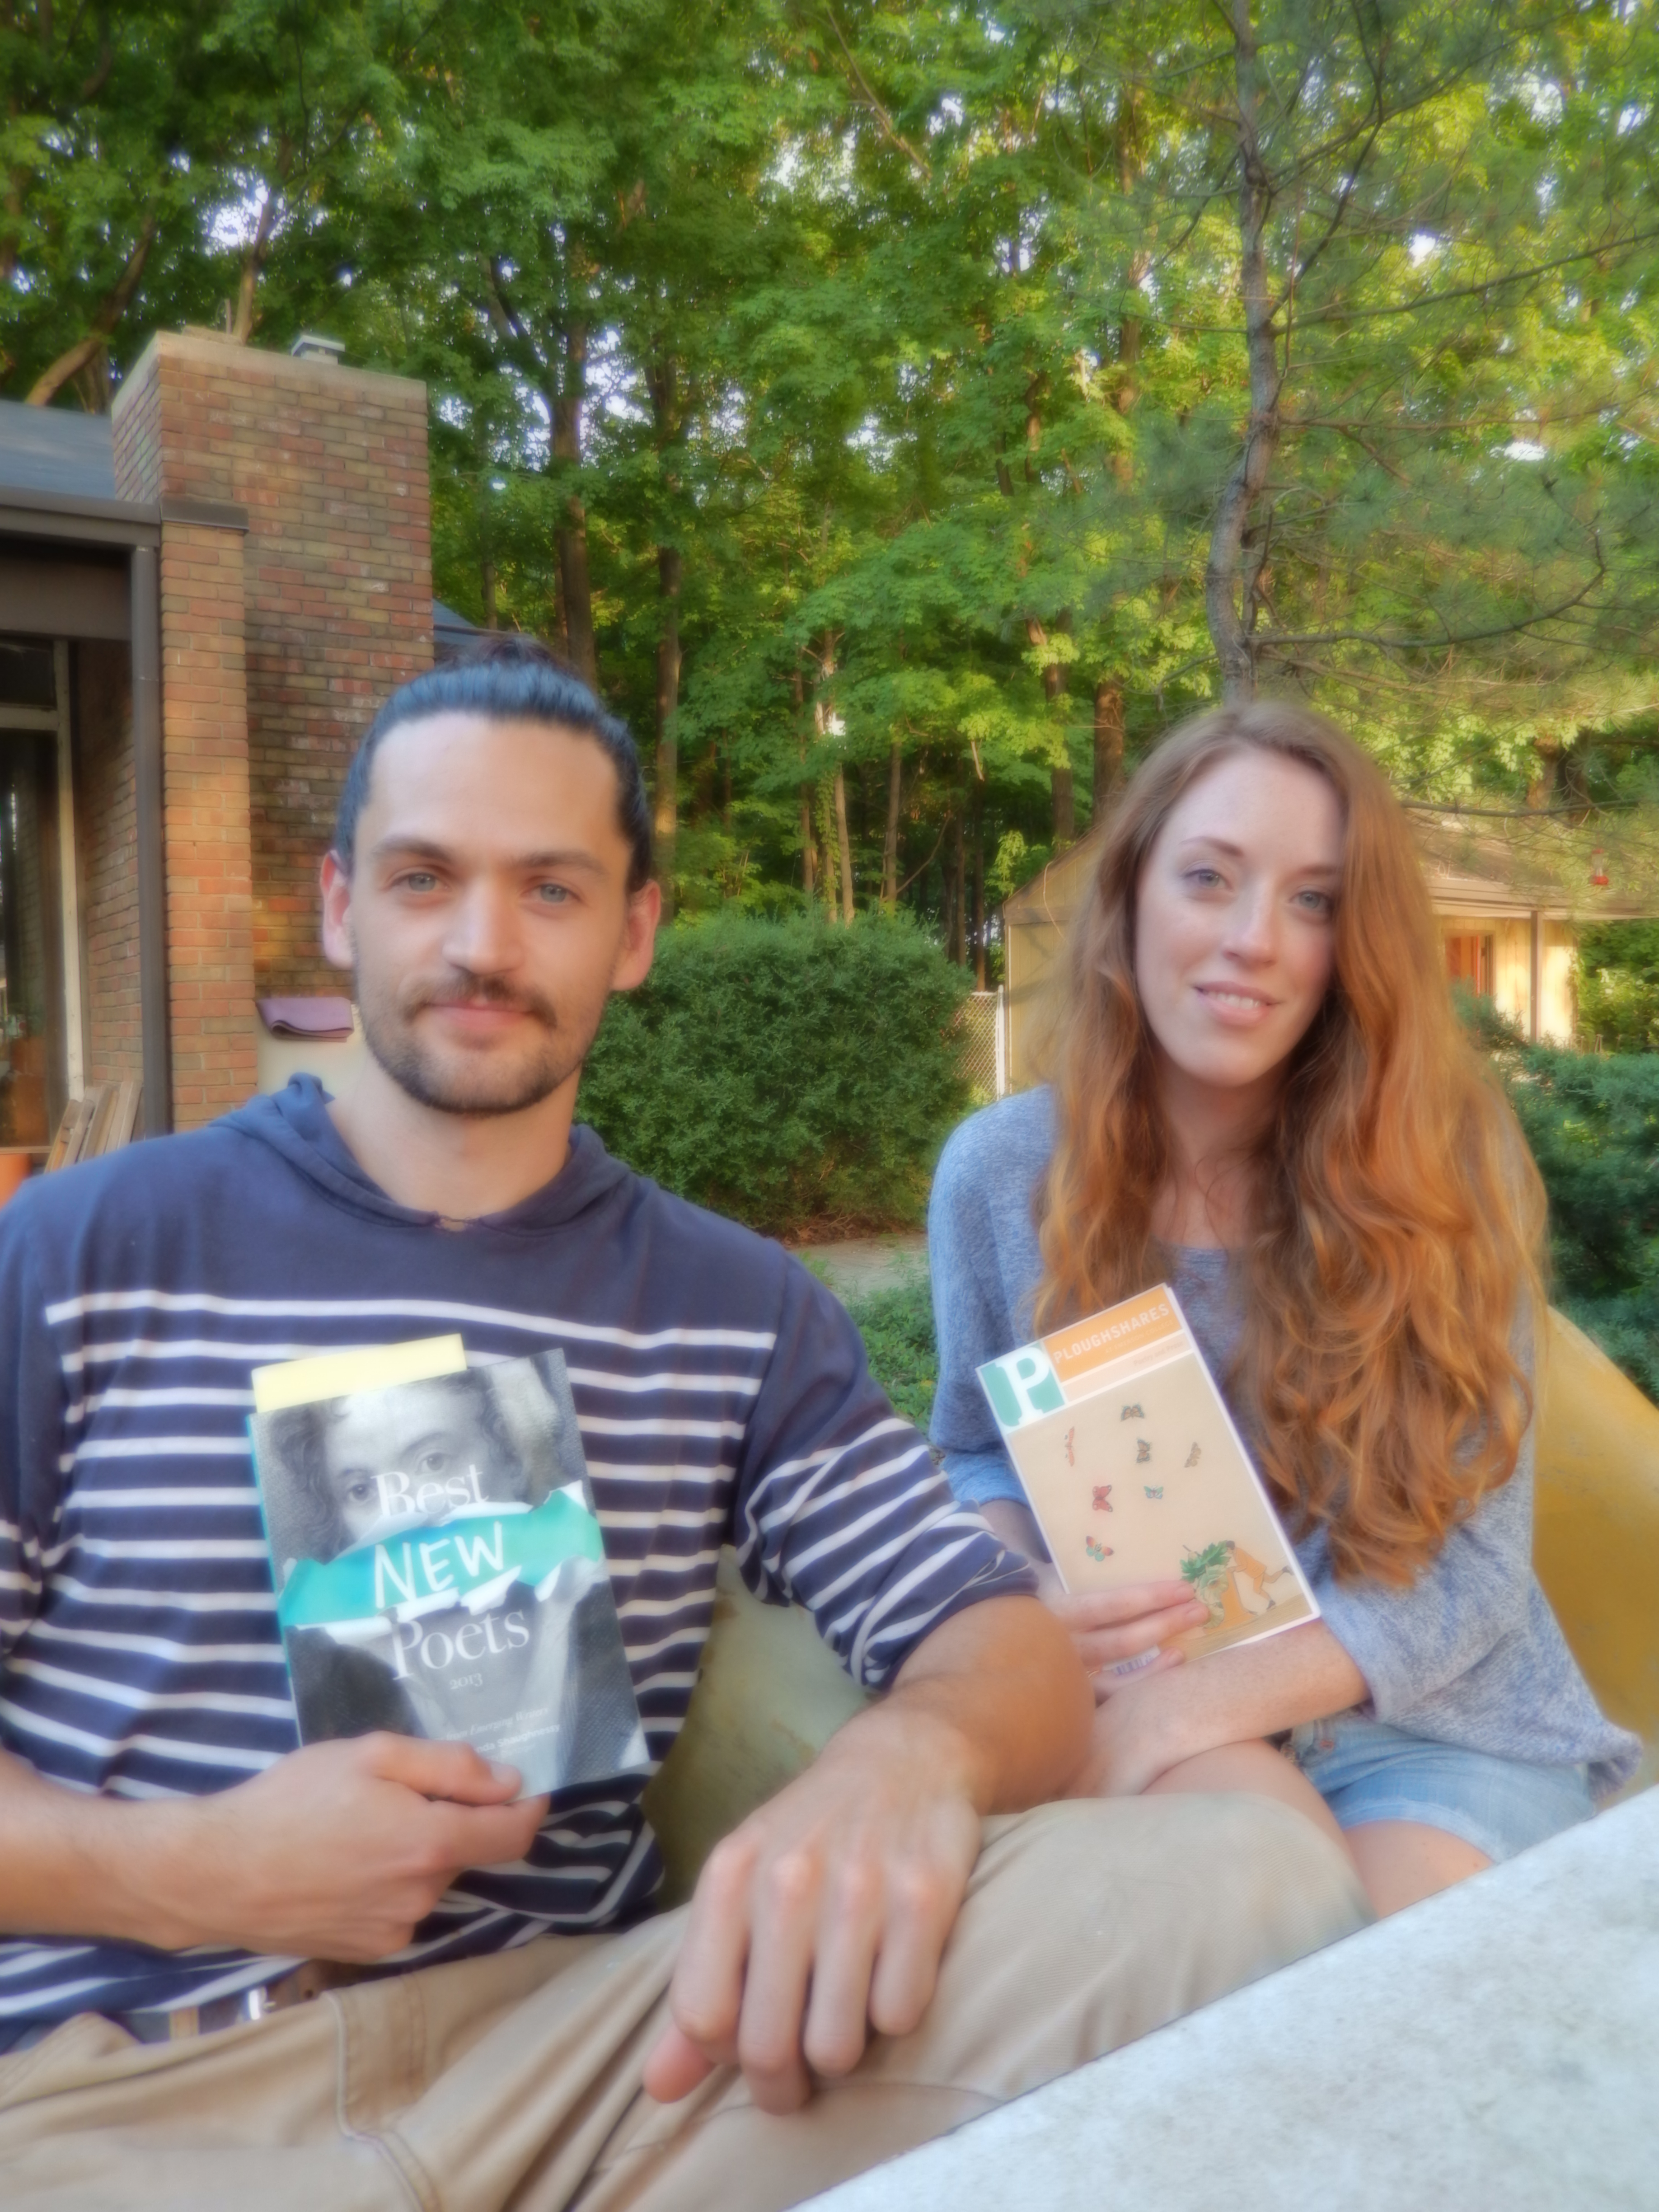 Max Somers holds a copy of Best New Poets 2013, while Sara Gelston is holding Ploughshares His poem, “The Narrative Poem,” is in Best New Poets. Sara’s poem, “Alternate Ending,” appears in Ploughshares.